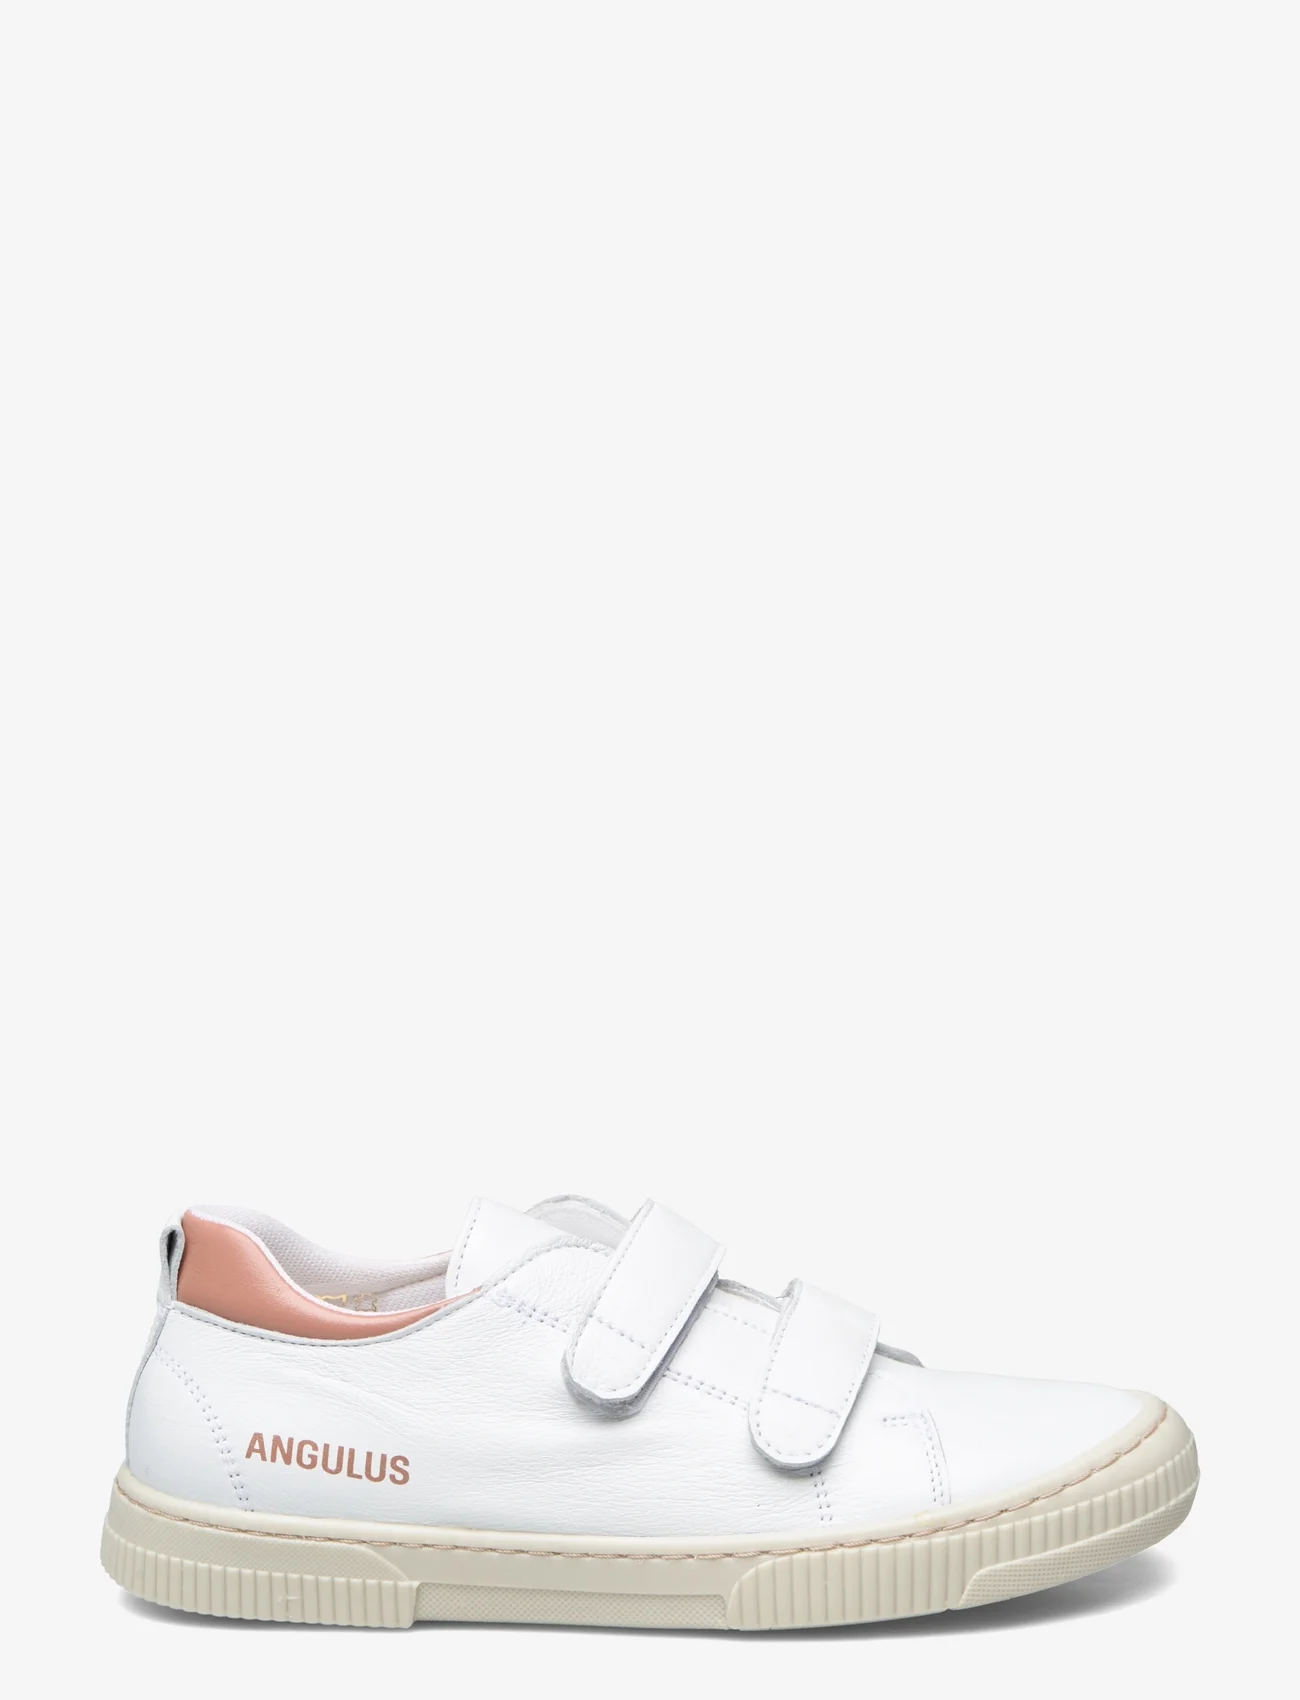 ANGULUS - Shoes - flat - with velcro - summer savings - 1521/1470 white/d.peach - 1